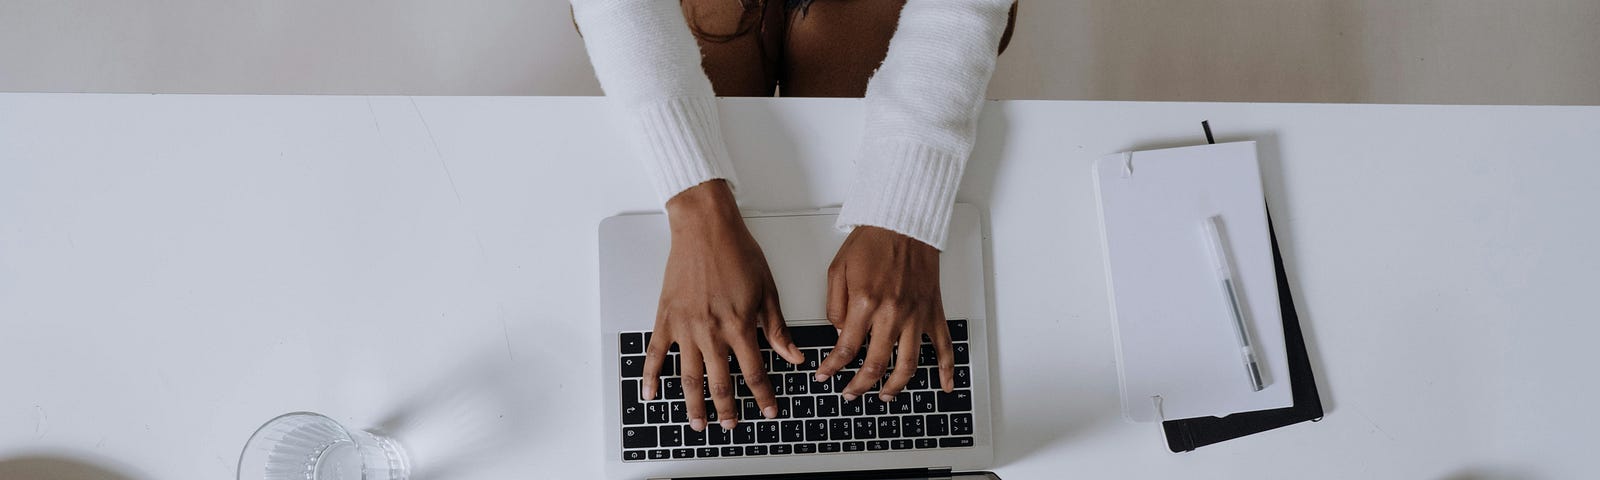 woman in white long sleeve shirt using a Macbook pro on a white desk